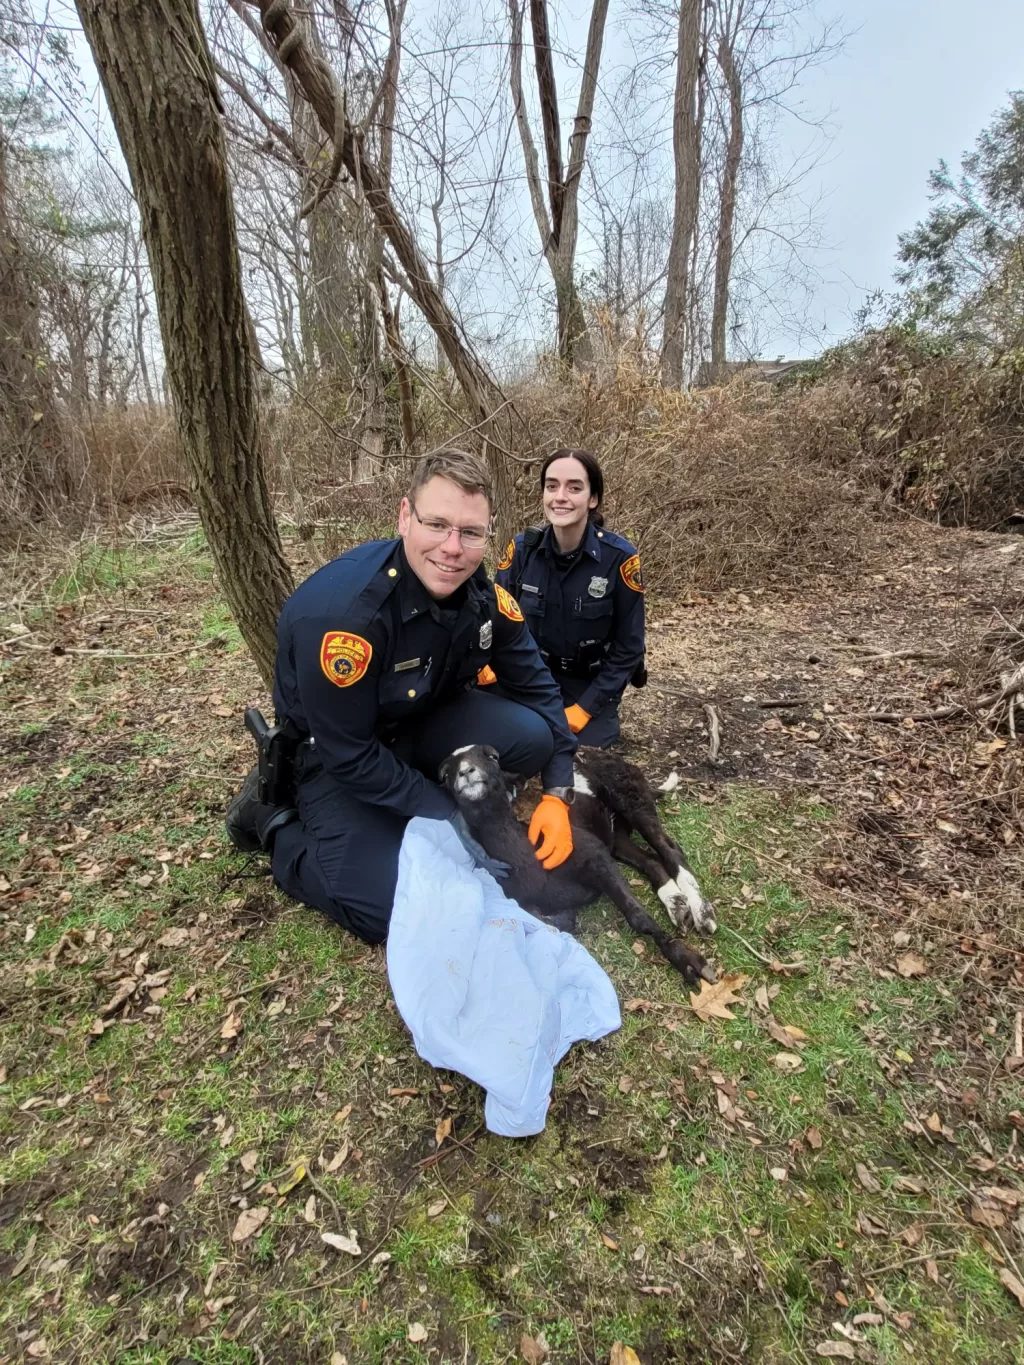 (Photo: SCPD) Suffolk County Seventh Precinct Officers Doug Draude (front) and Samantha Thompson (back) nursed this sheep to health after it was found tied to a tree in East Moriches.